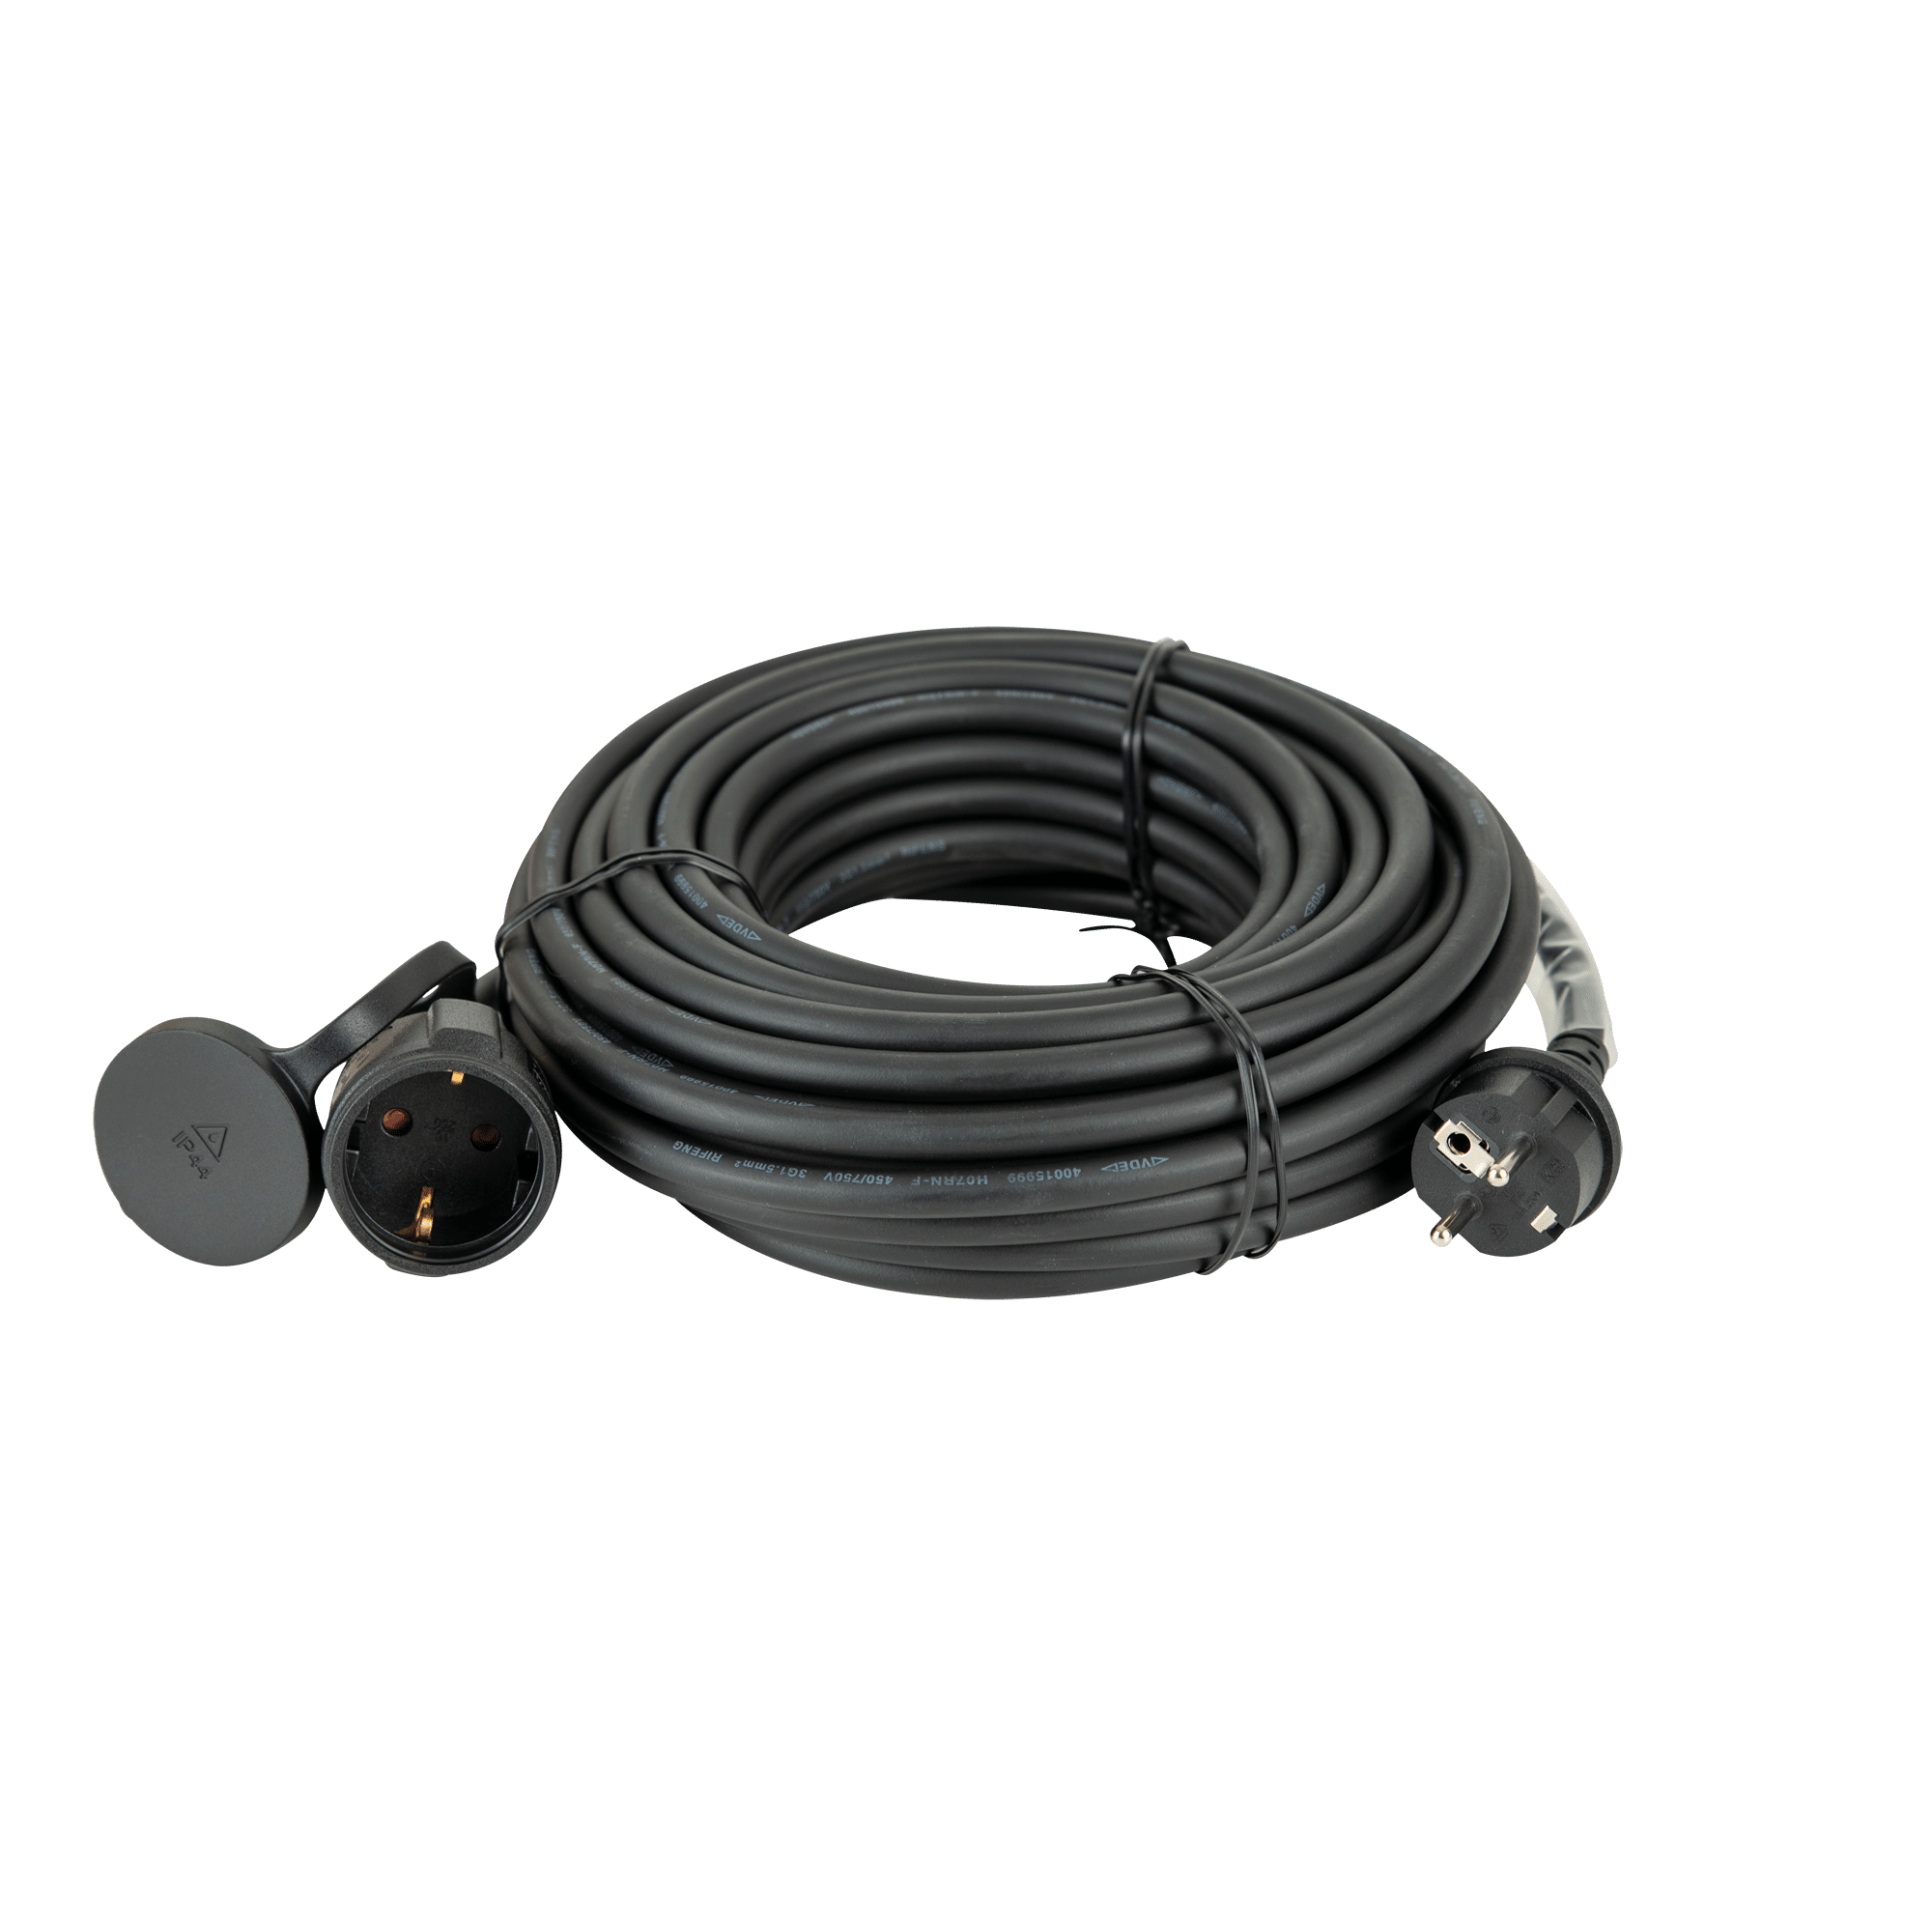 H07RN-F 3G1.5 Schuko Extension Cable - Onlinediscowinkel.nl